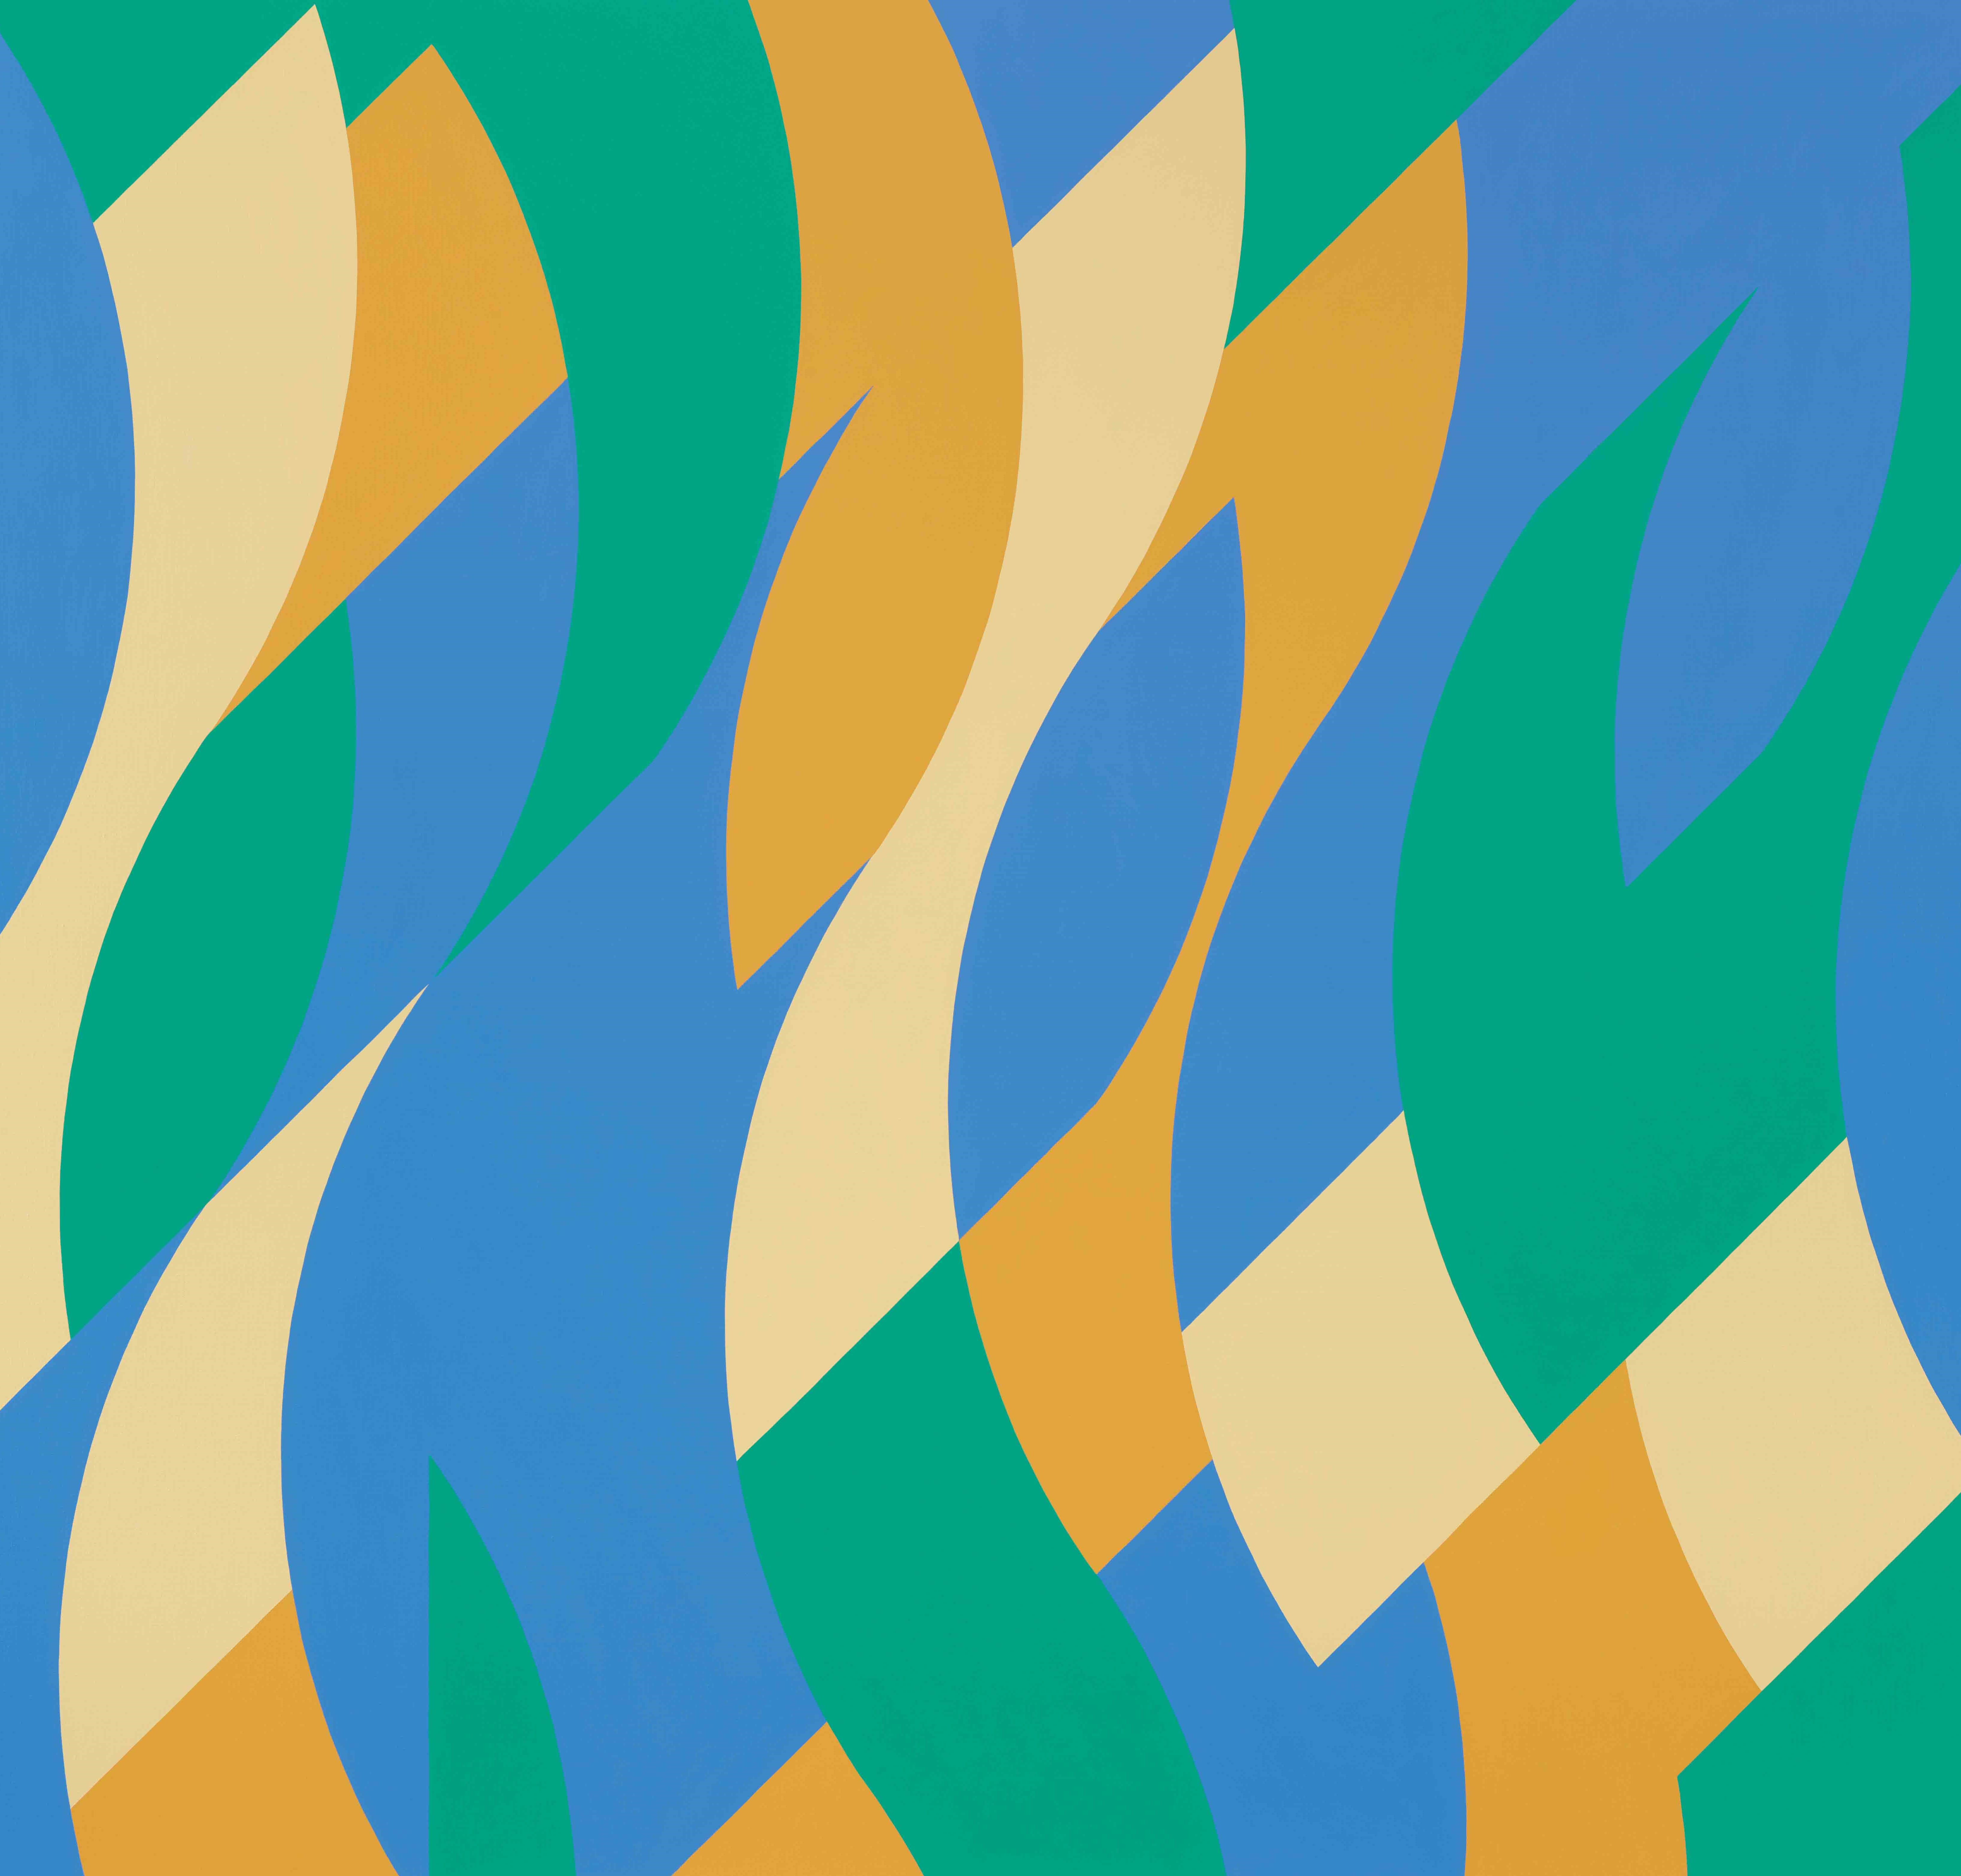 Bridget Riley, ‘Reve,’ 1999 oil on canvas. Bridget Riley Collection, © 2022 Bridget Riley, All rights reserved 